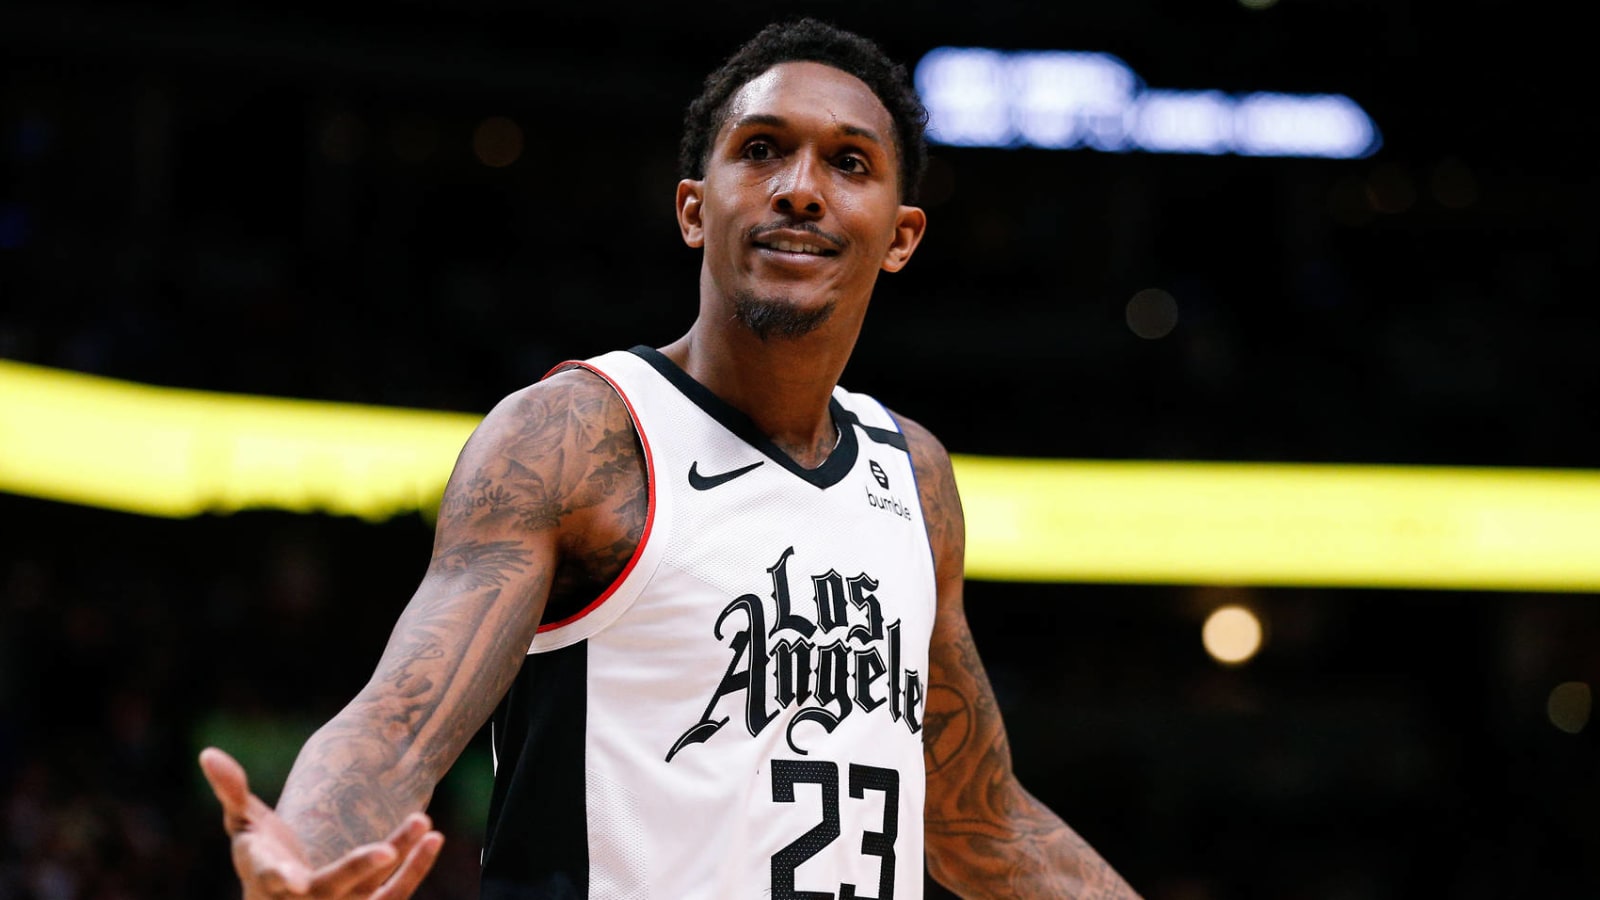 Lou Williams Wallpapers